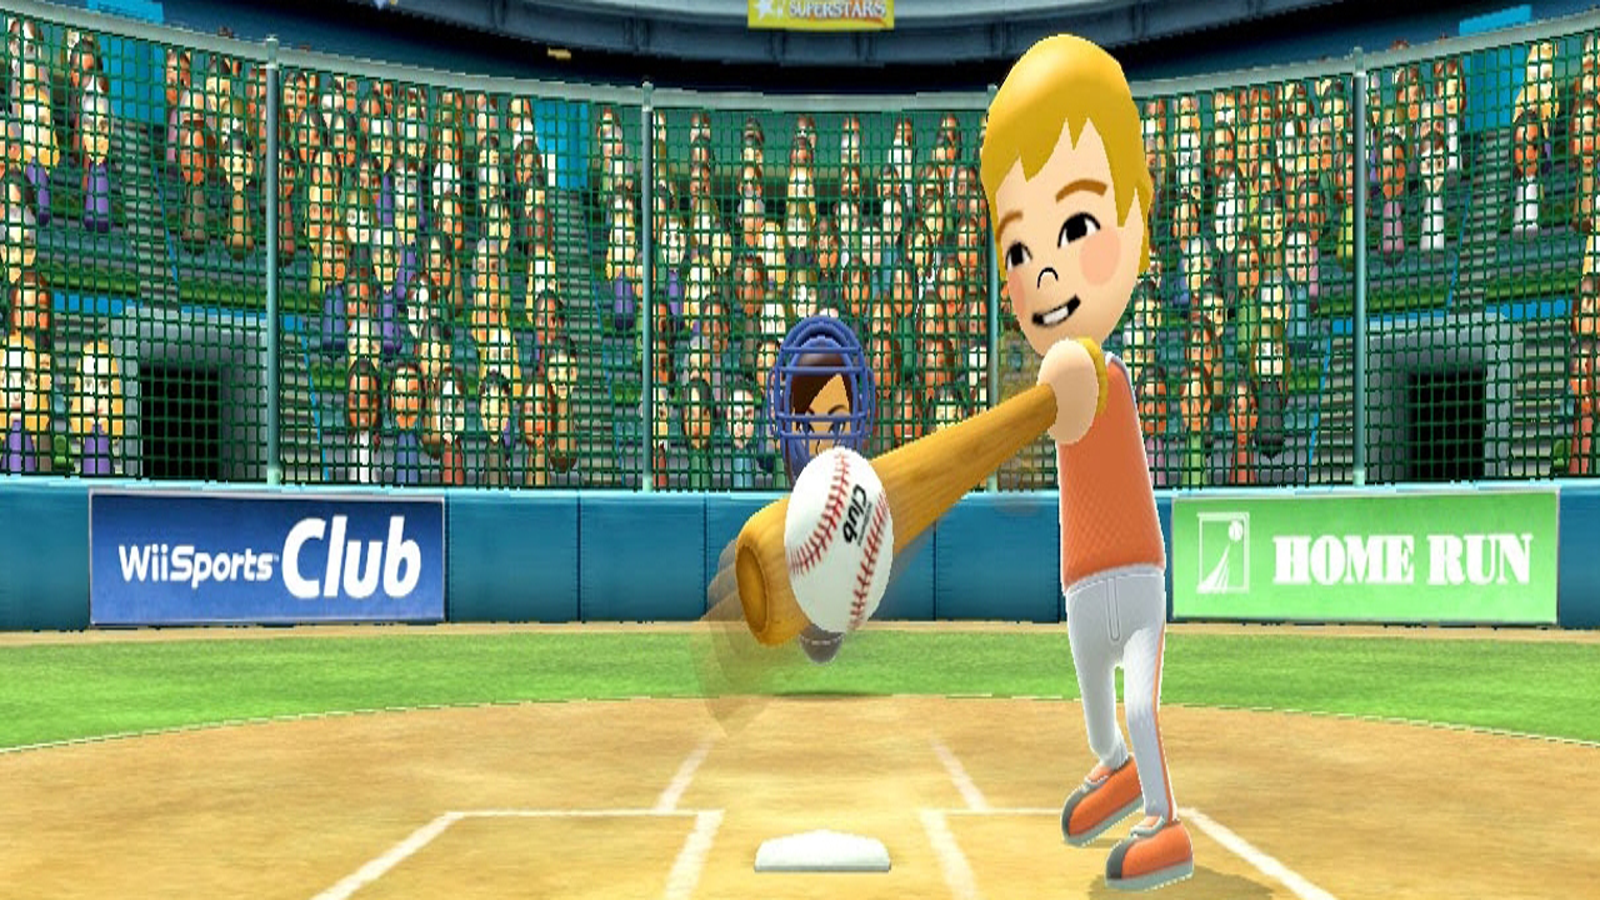 Wii Sports Club Wii U Review: Party Like it's 2006 | VG247